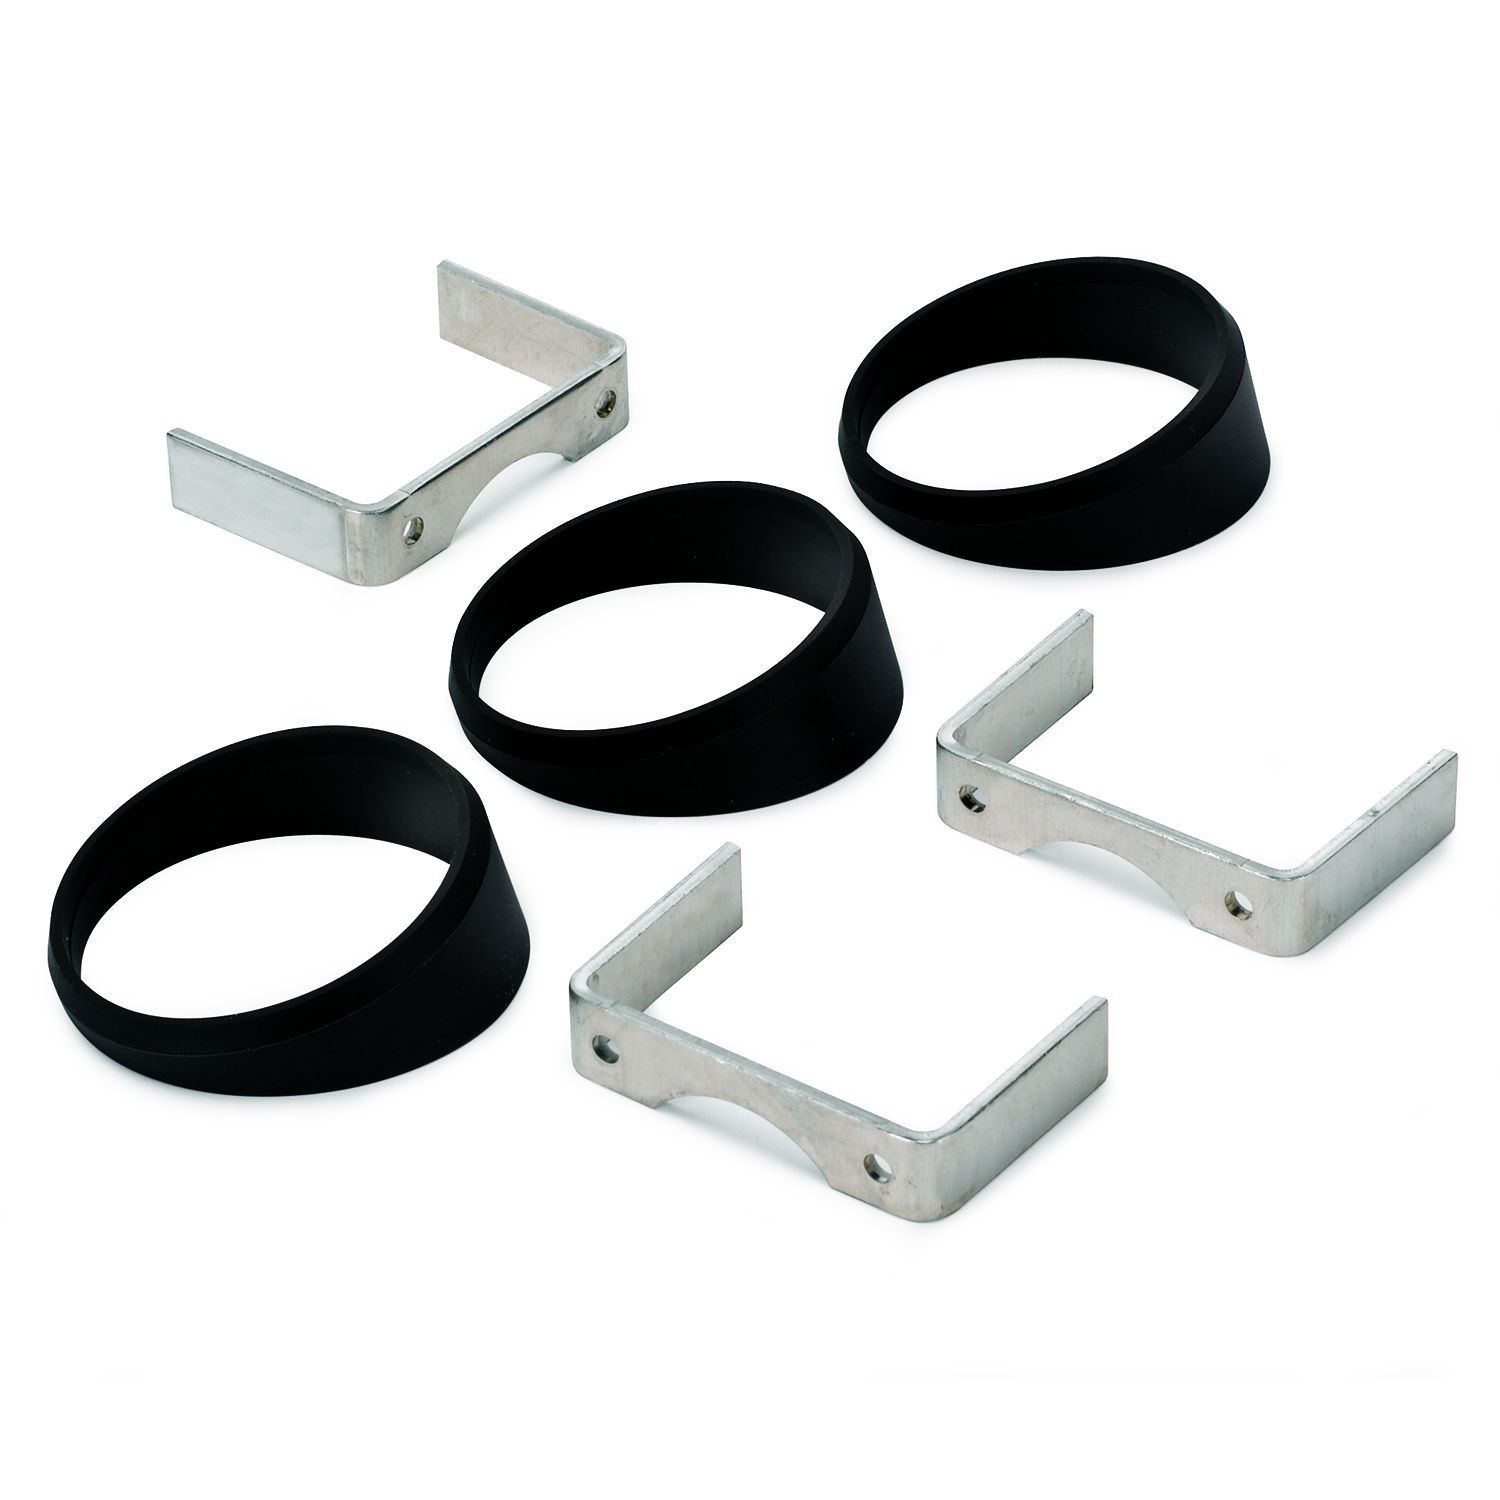 AU3244 - 2-5/8 ANGLE RINGS, PACK OF 3